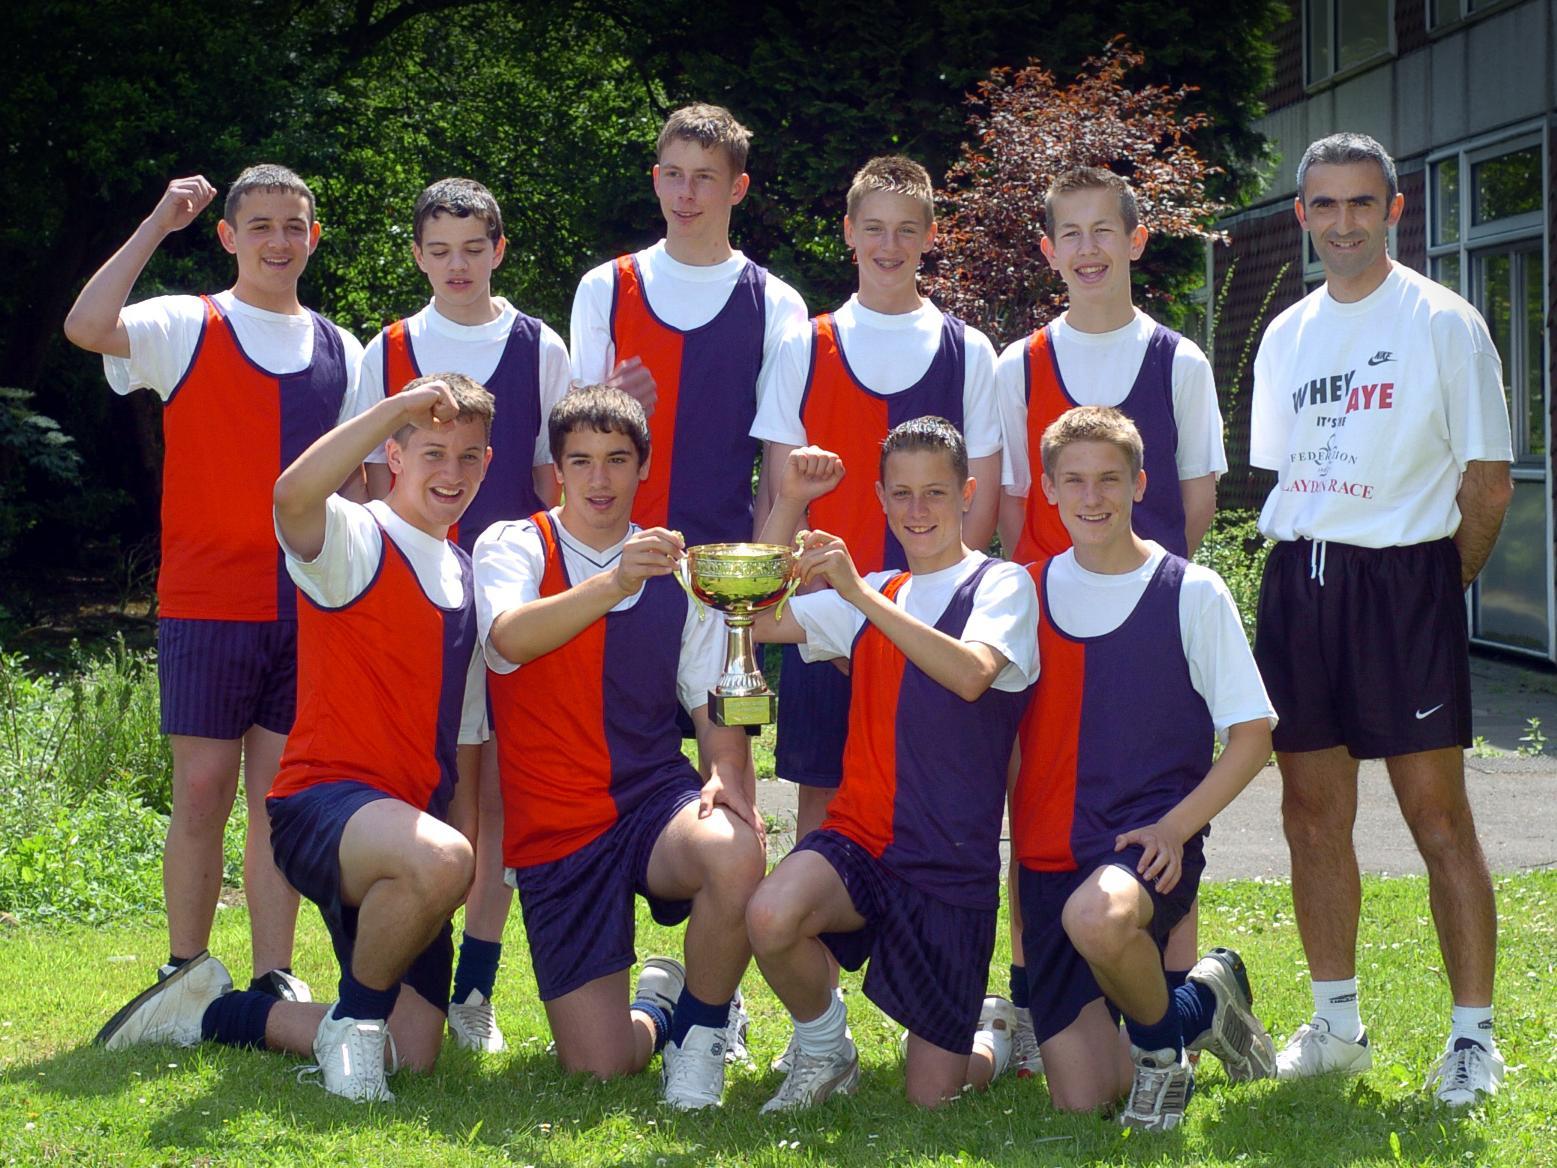 10 sports pictures from our archives / Email daniel.gregory@jpimedia.co.uk or Tweet @SN_Sport with any information